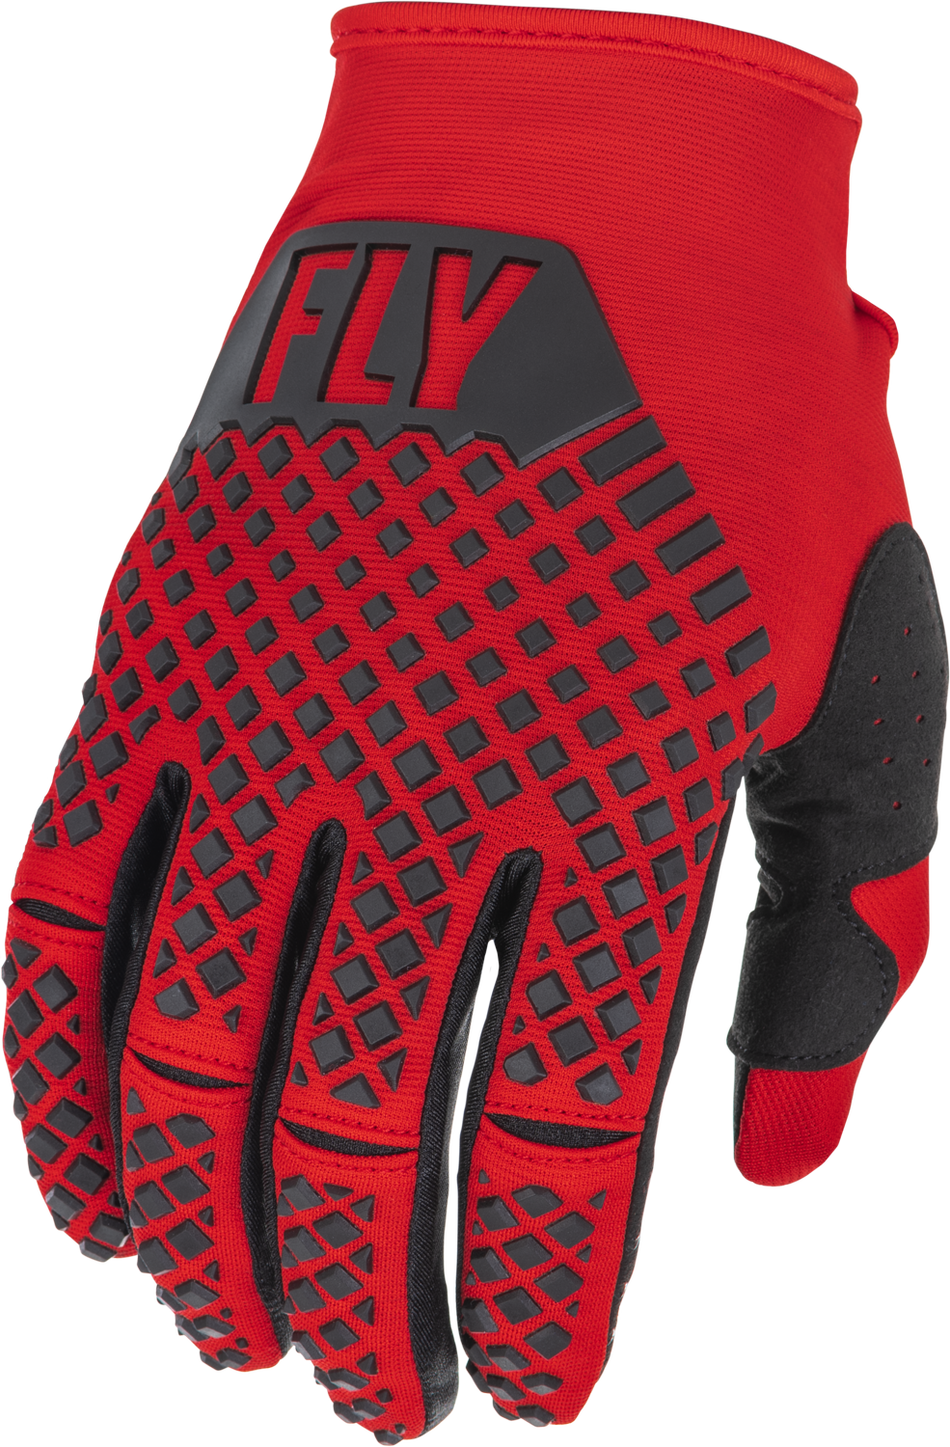 FLY RACING Youth Kinetic Gloves Red/Black Ym 375-413YM